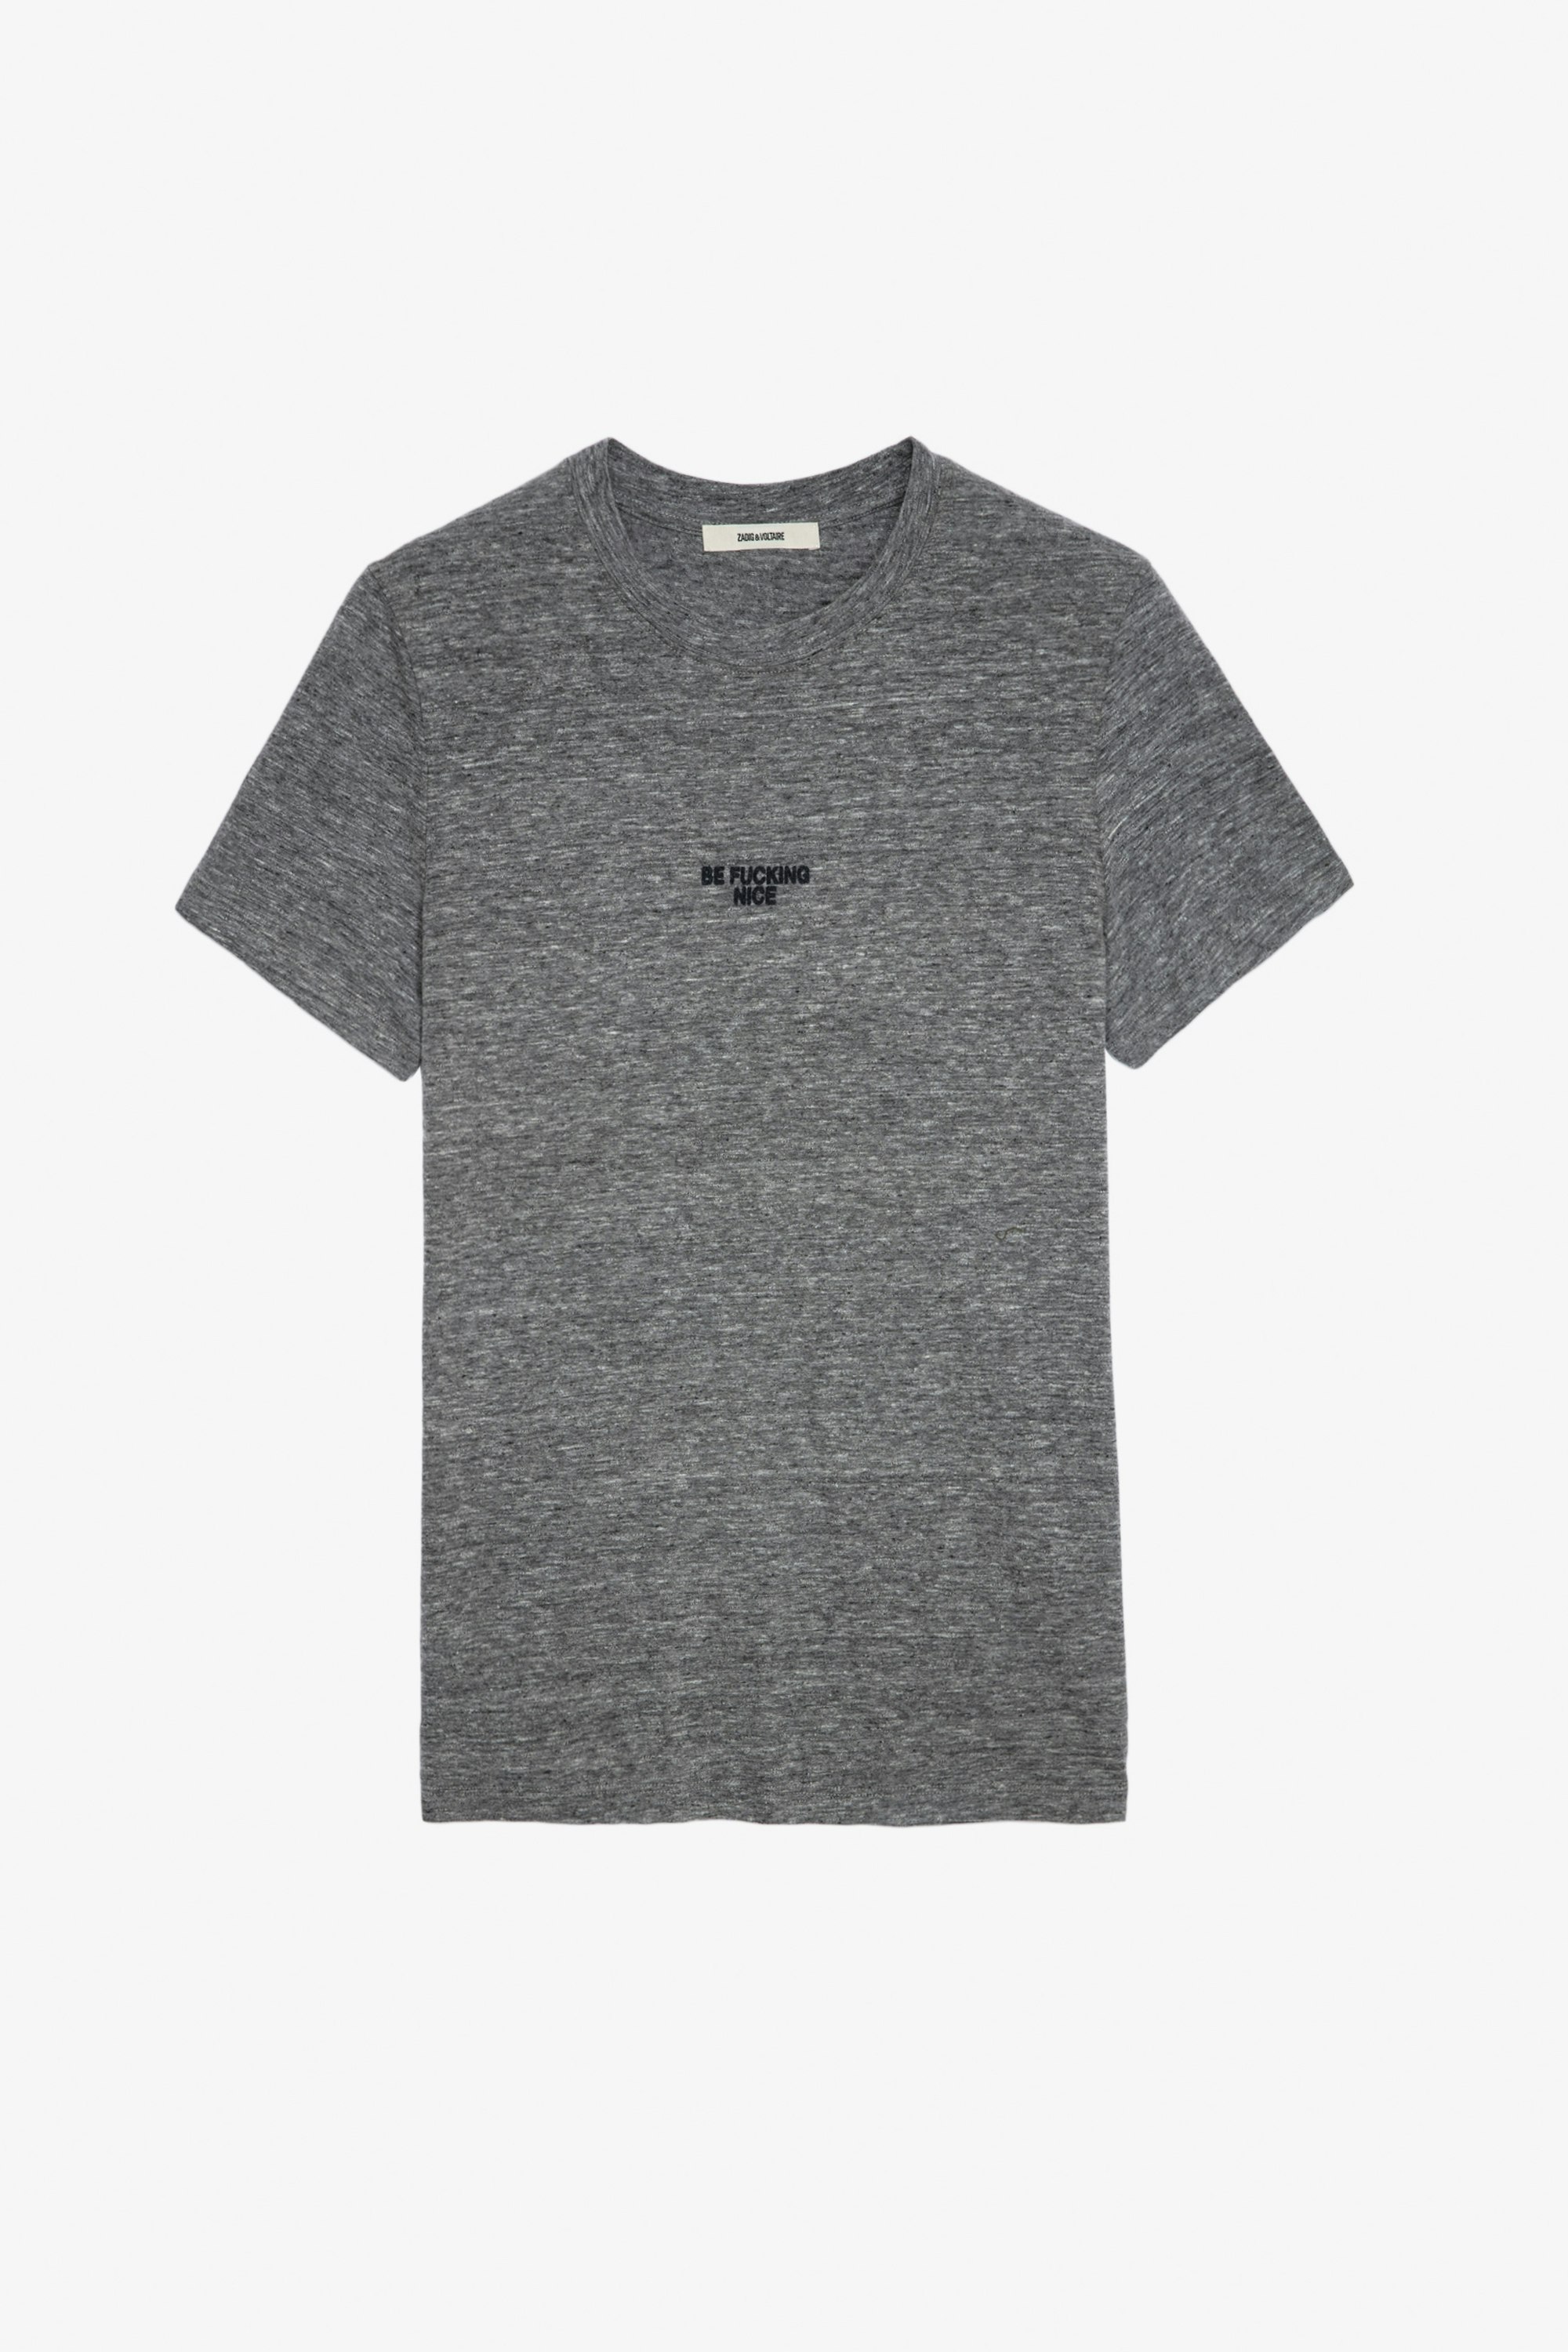 Tommy T-shirt - Men’s grey marl cotton T-shirt with “Be Fucking Nice” slogan.